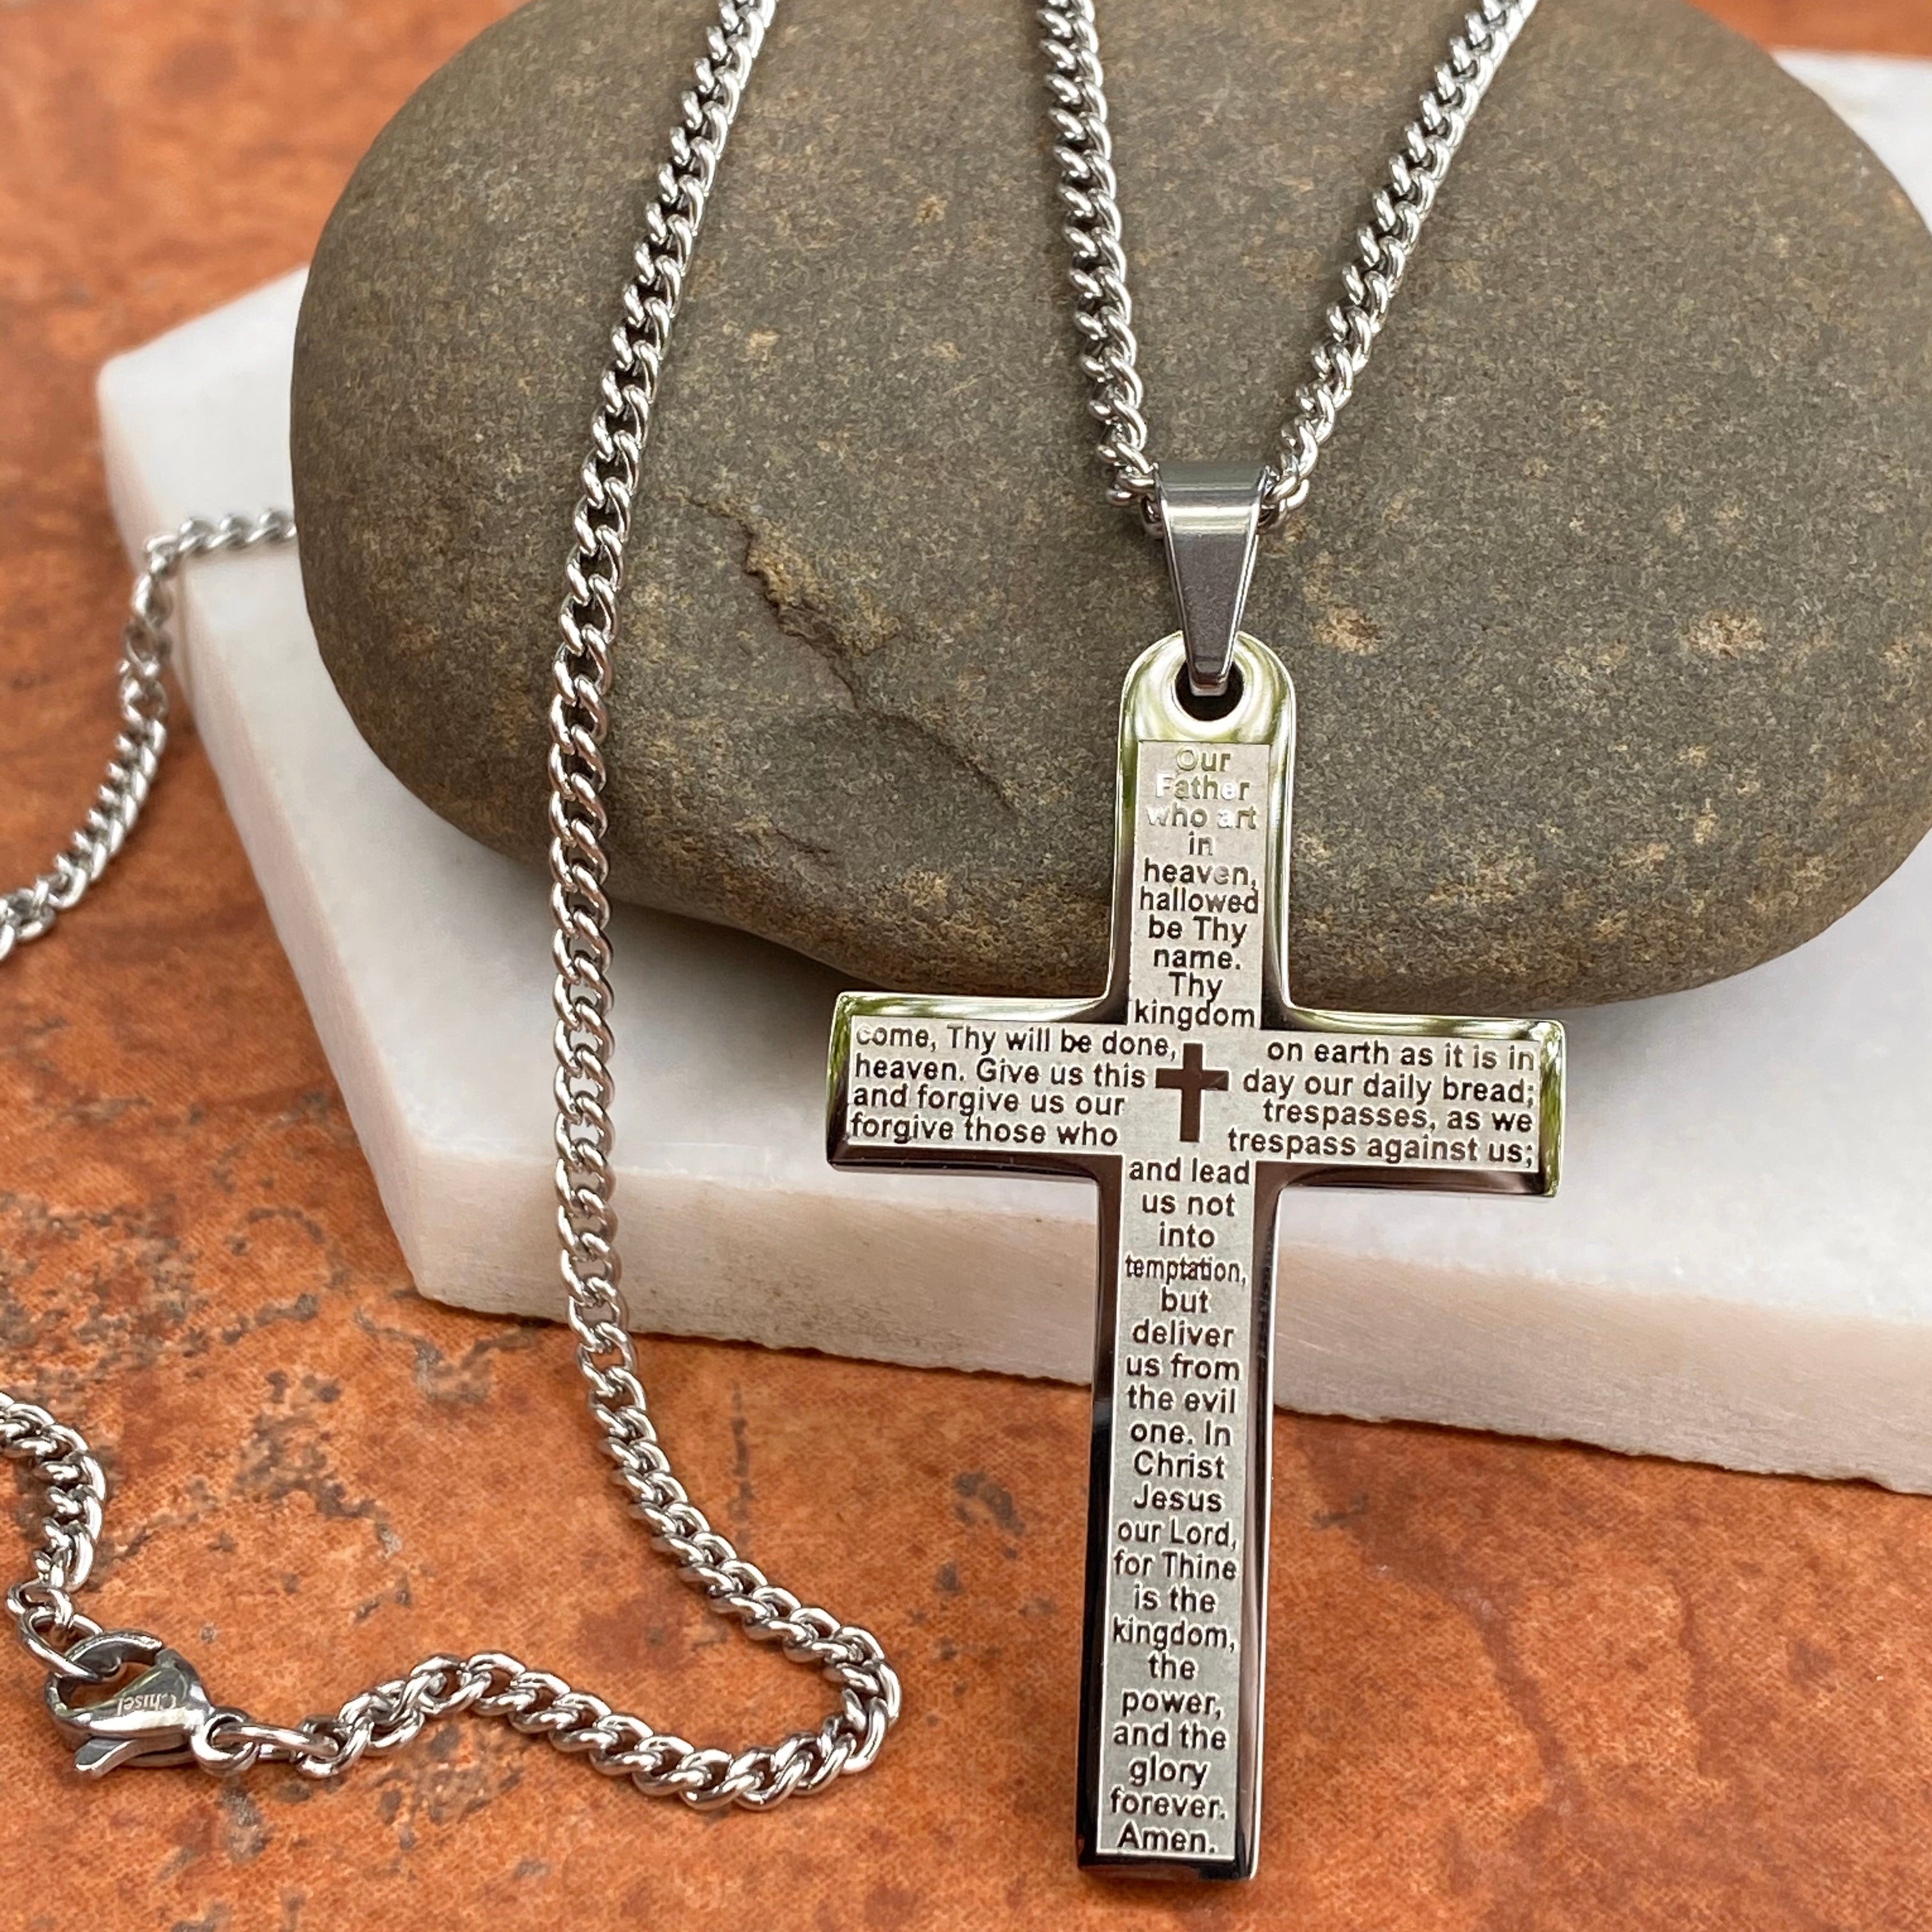 Italian Italy Country Map Dainty Cross Necklace Set With Pride I Heart Love  Capital Of Italy Rome City Charm For Souvenir From Jackhon, $38.08 |  DHgate.Com